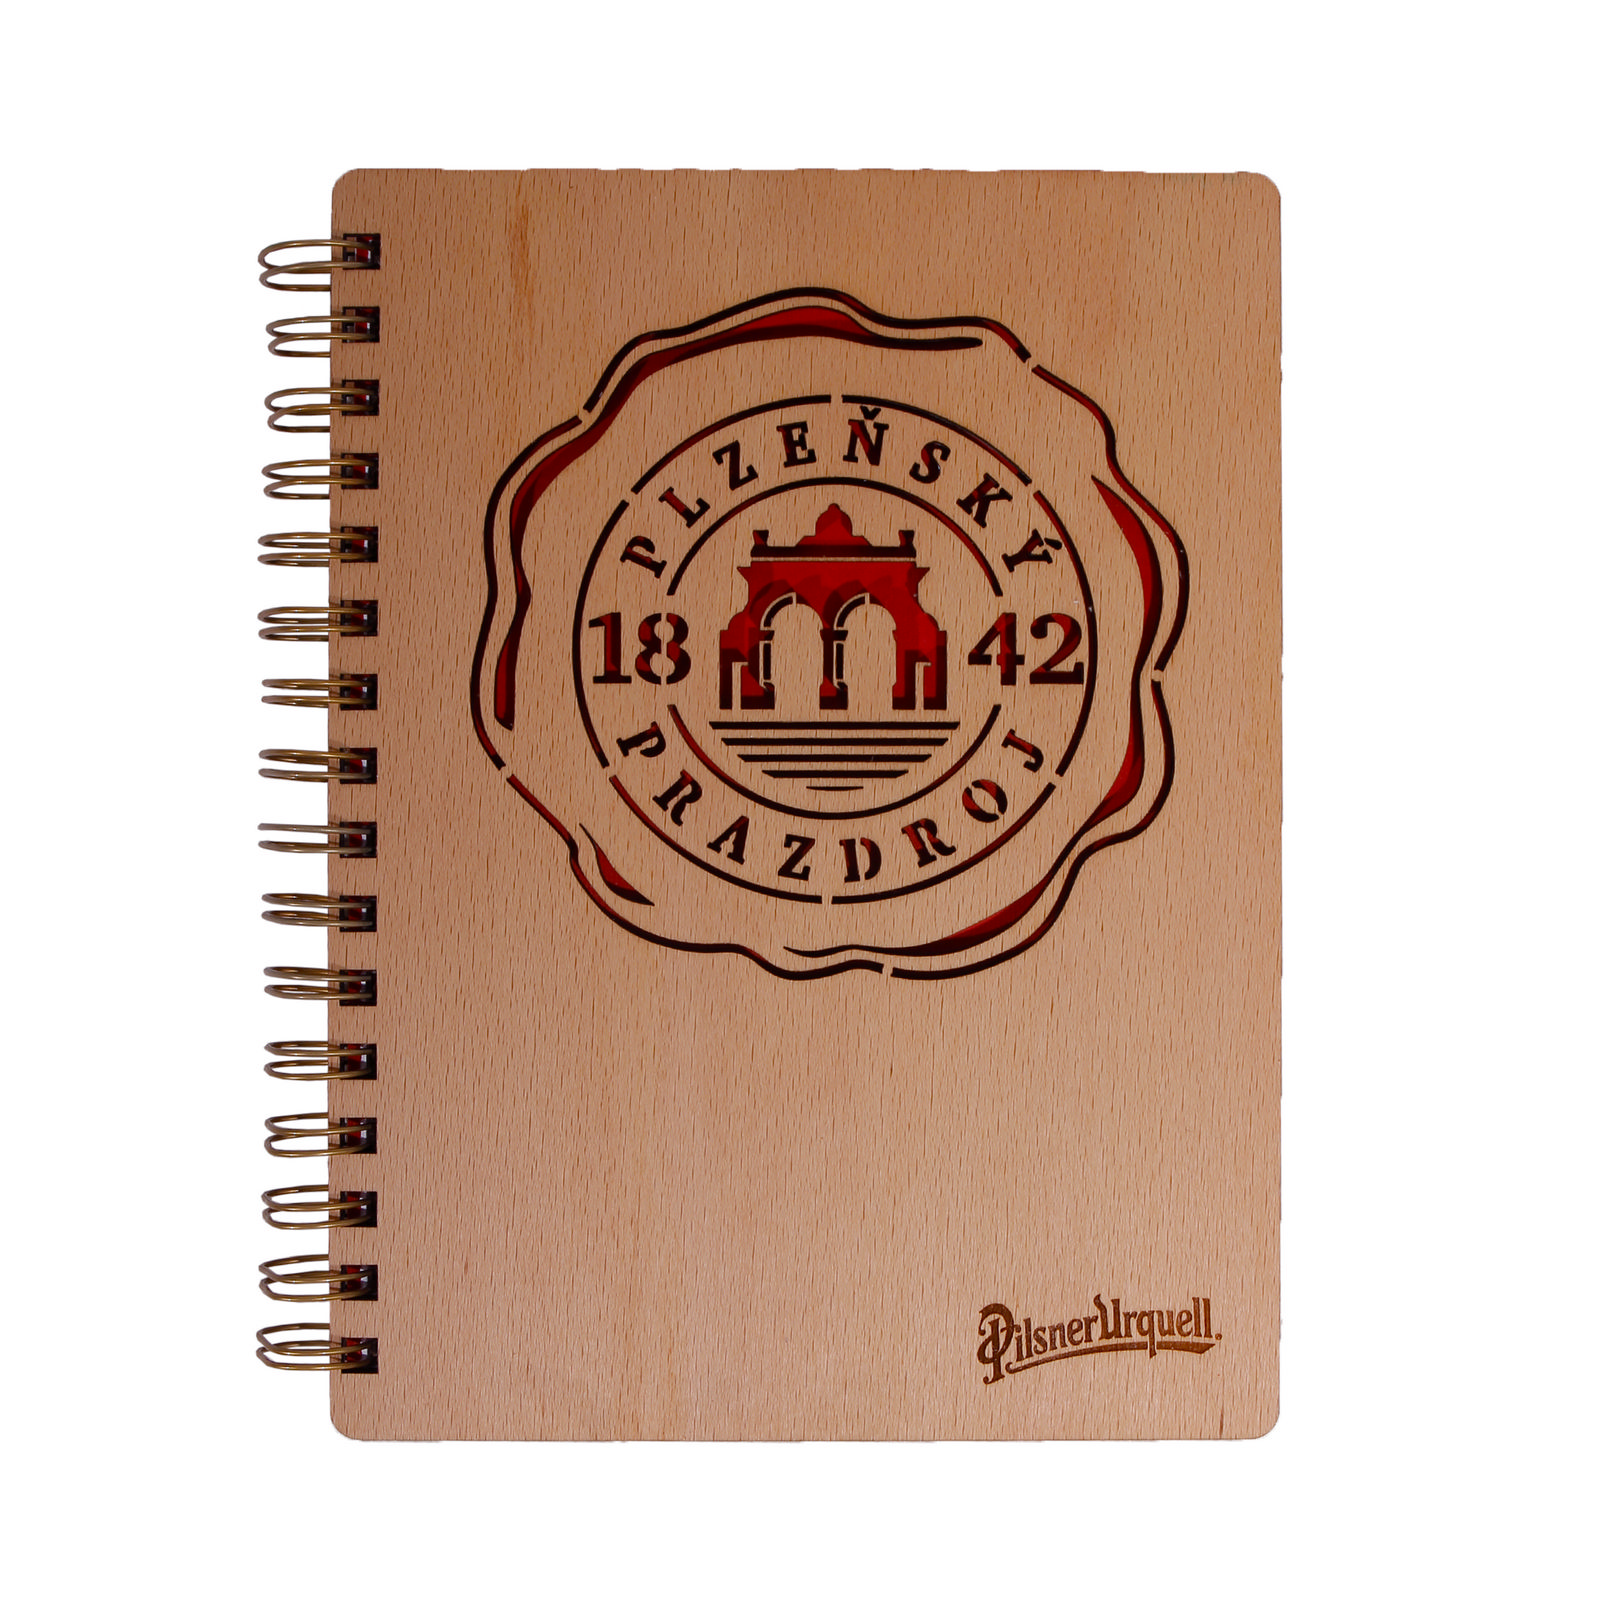 Red Pilsner Urquell Notepad with Wooden Boards